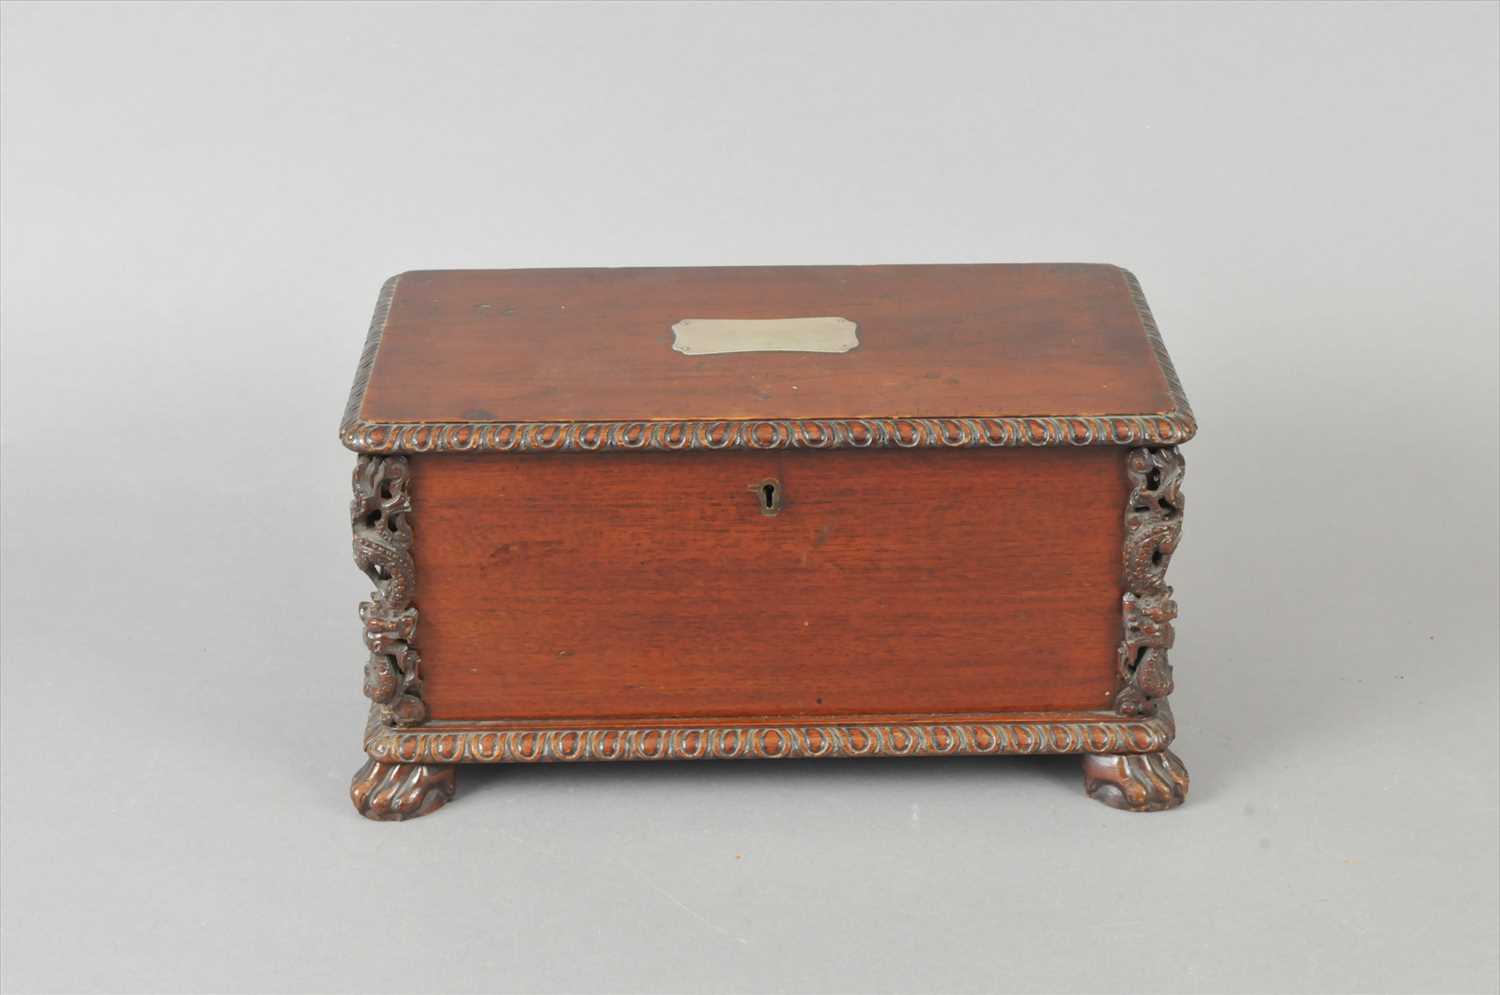 Lot 670 - A 19th century Chinese hardwood stationary box, likely for the European market